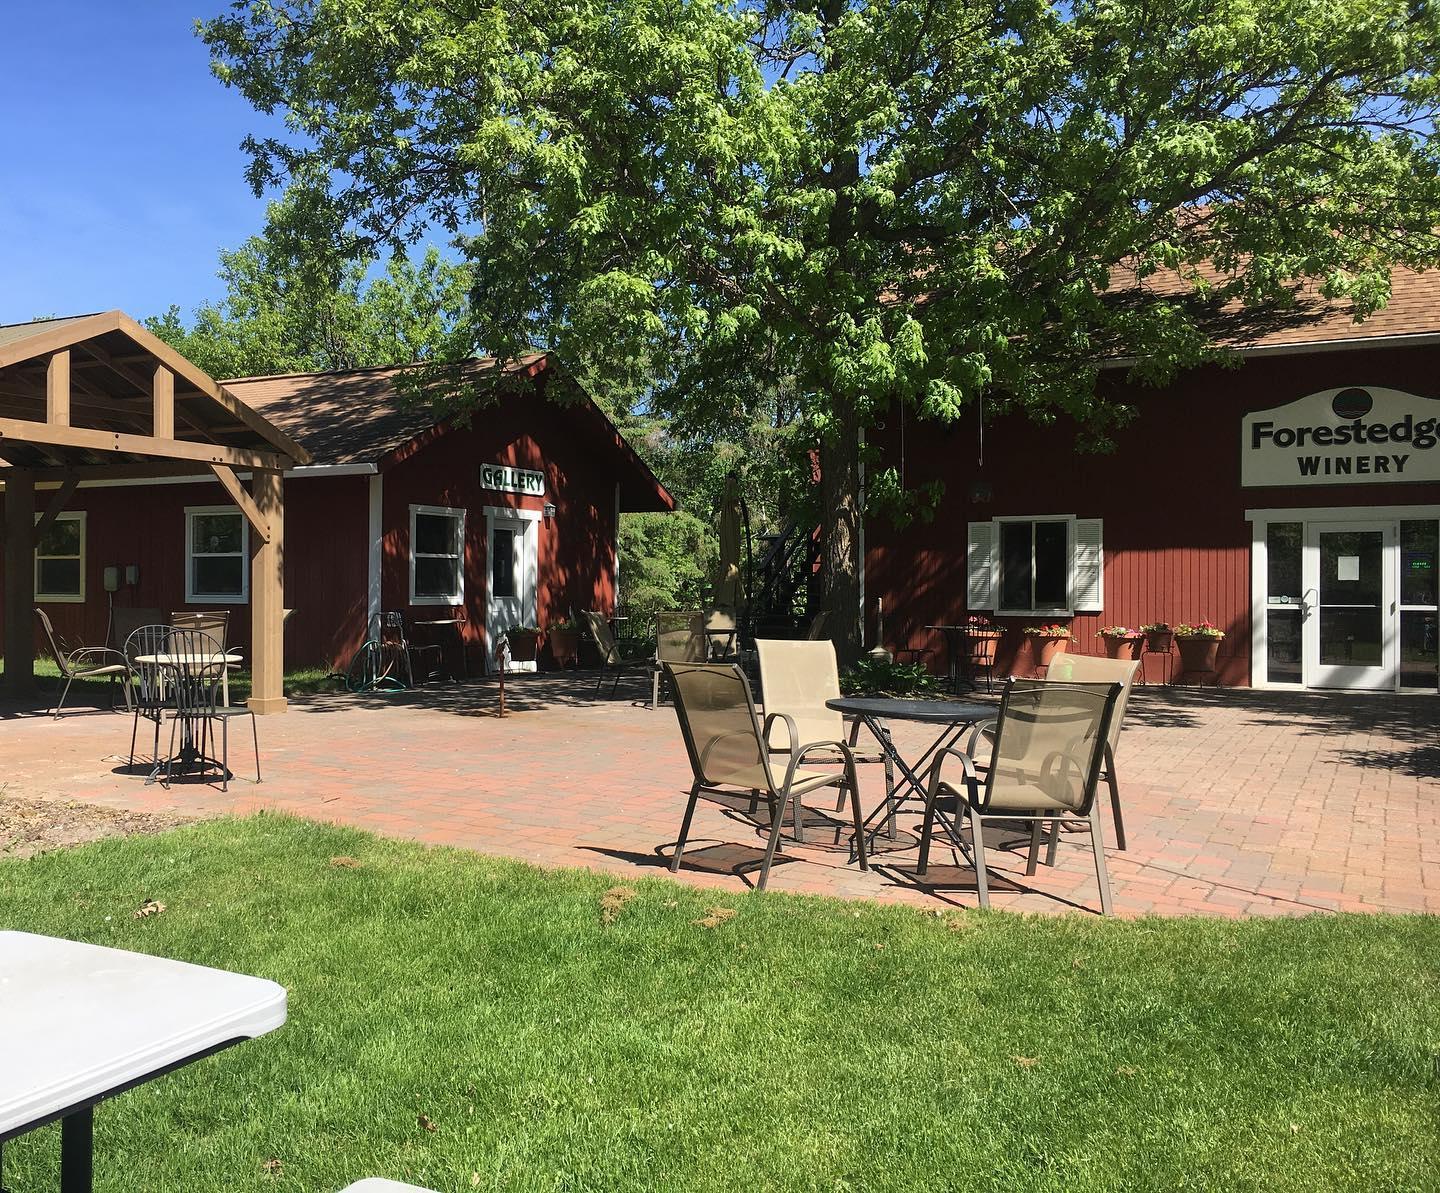 Pet Friendly Forestedge Winery